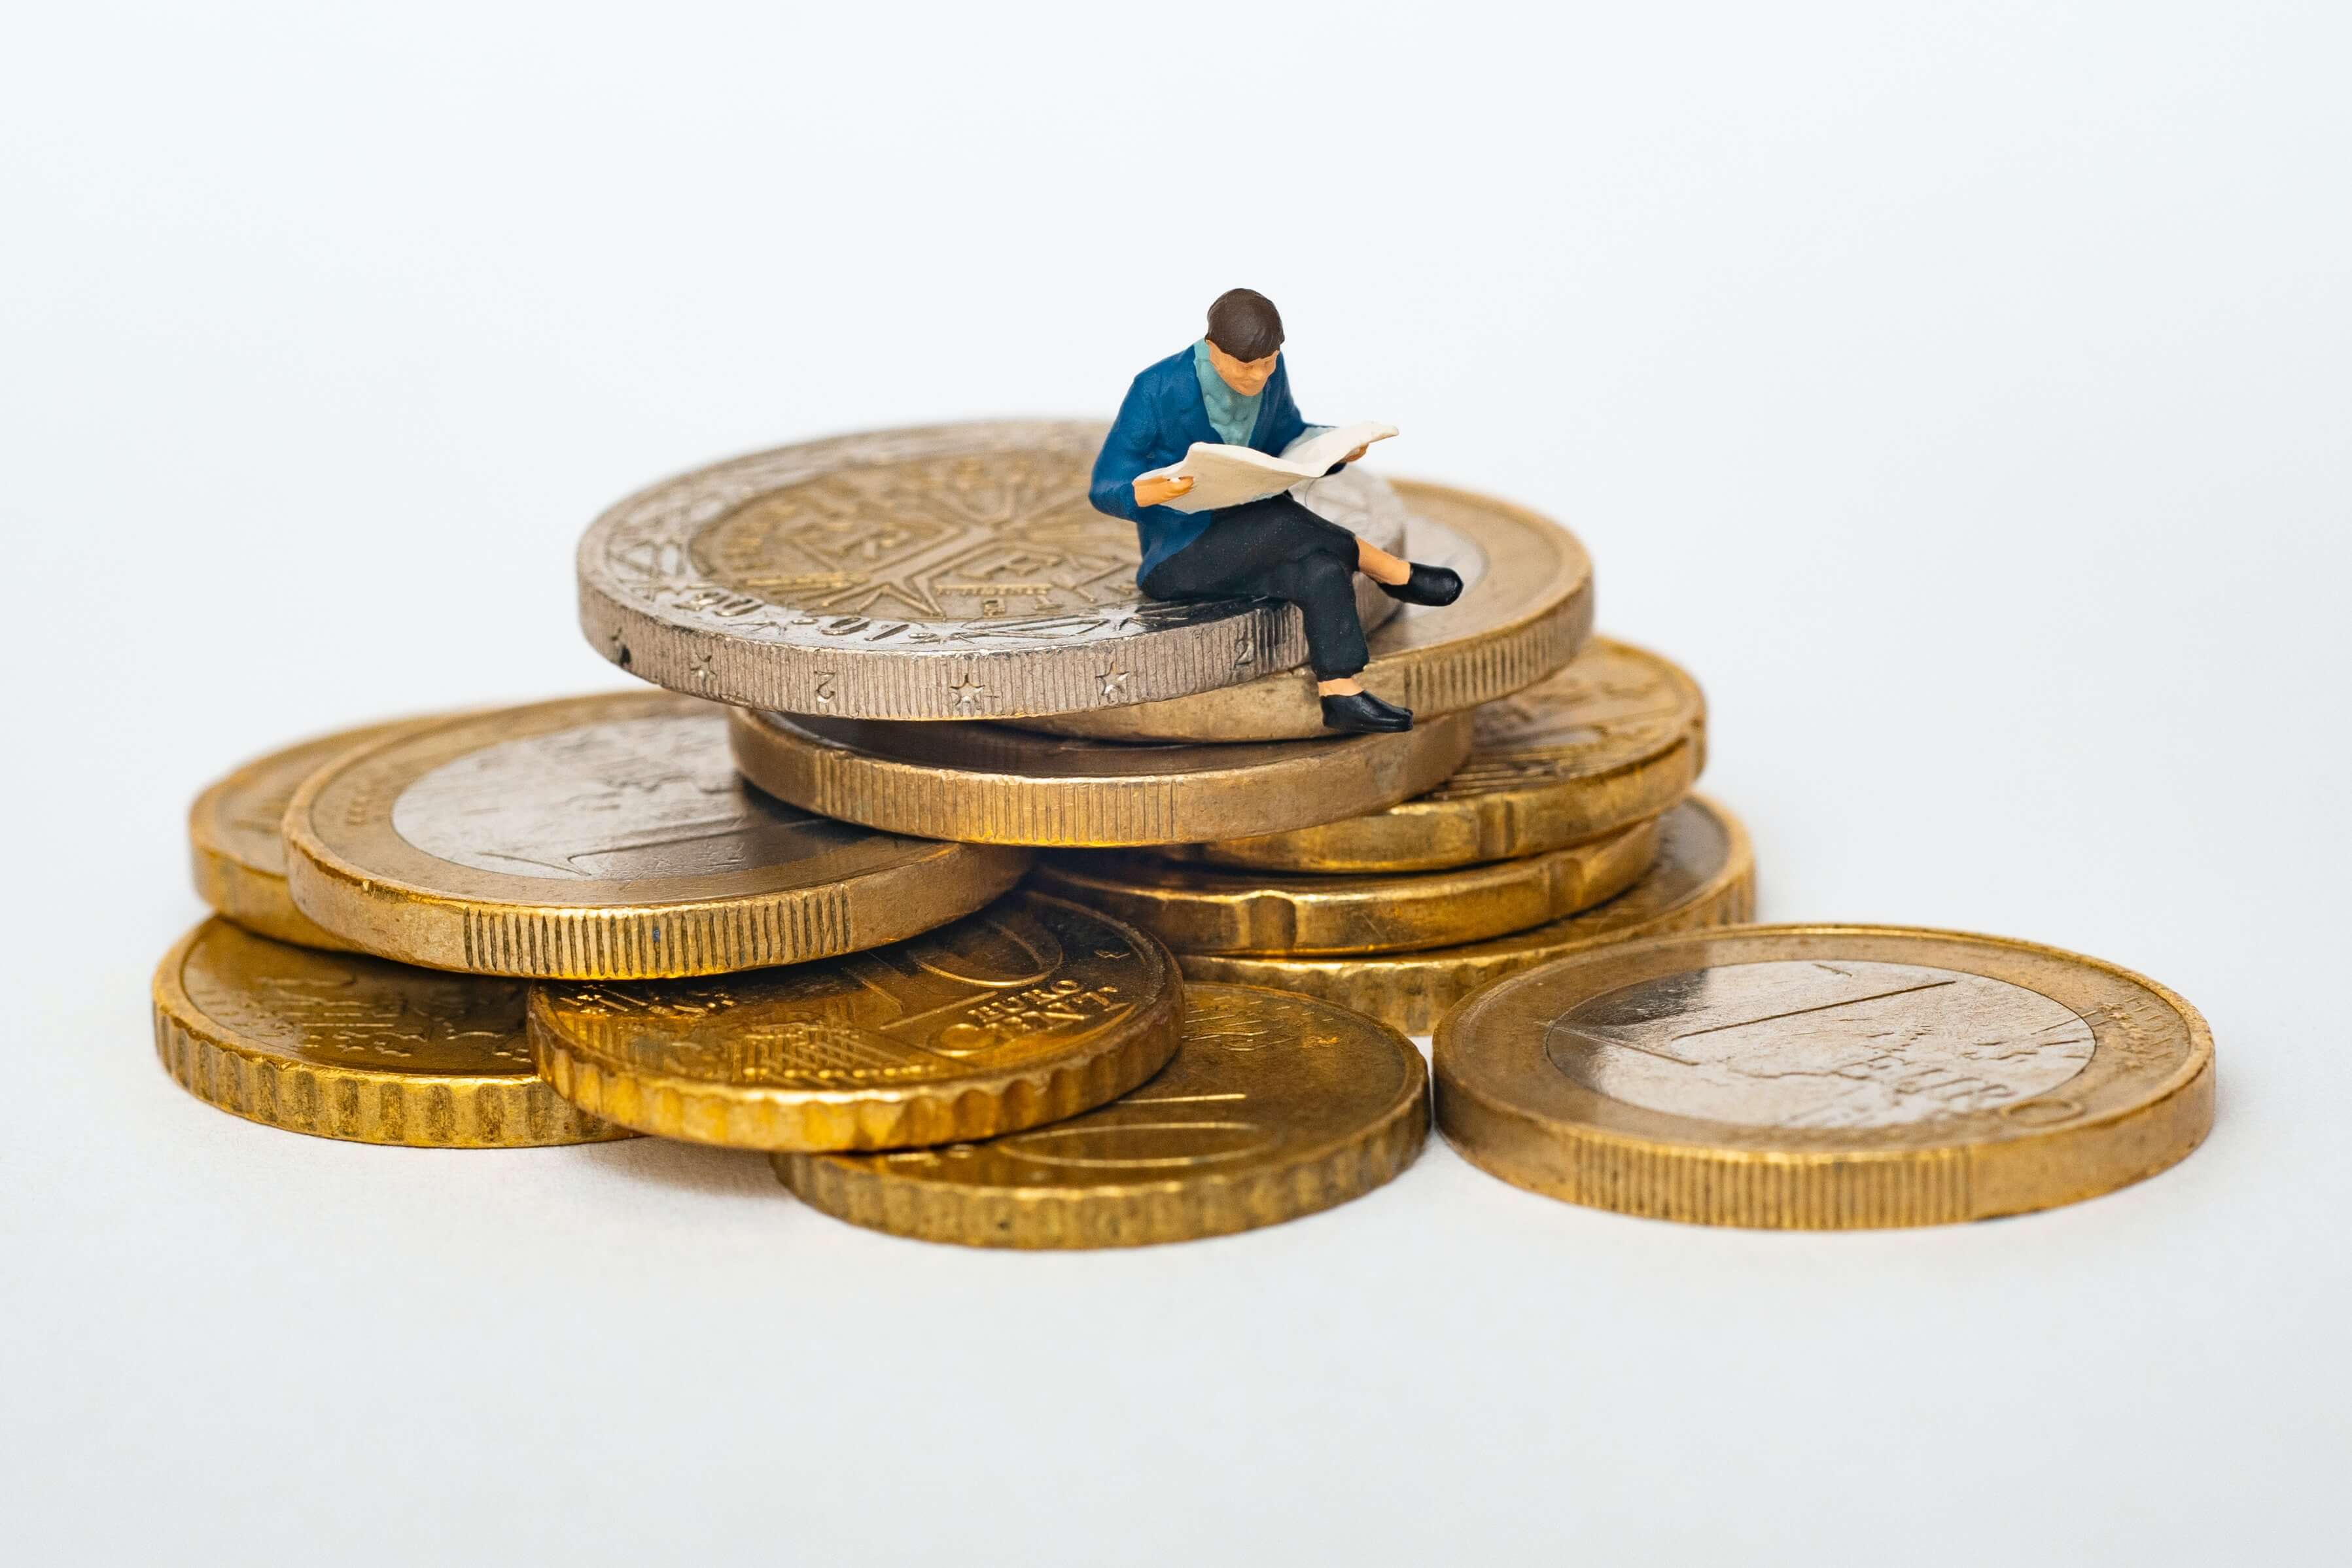 A tiny figurine of a person reading a newspaper sits on a pile of various Euro coins